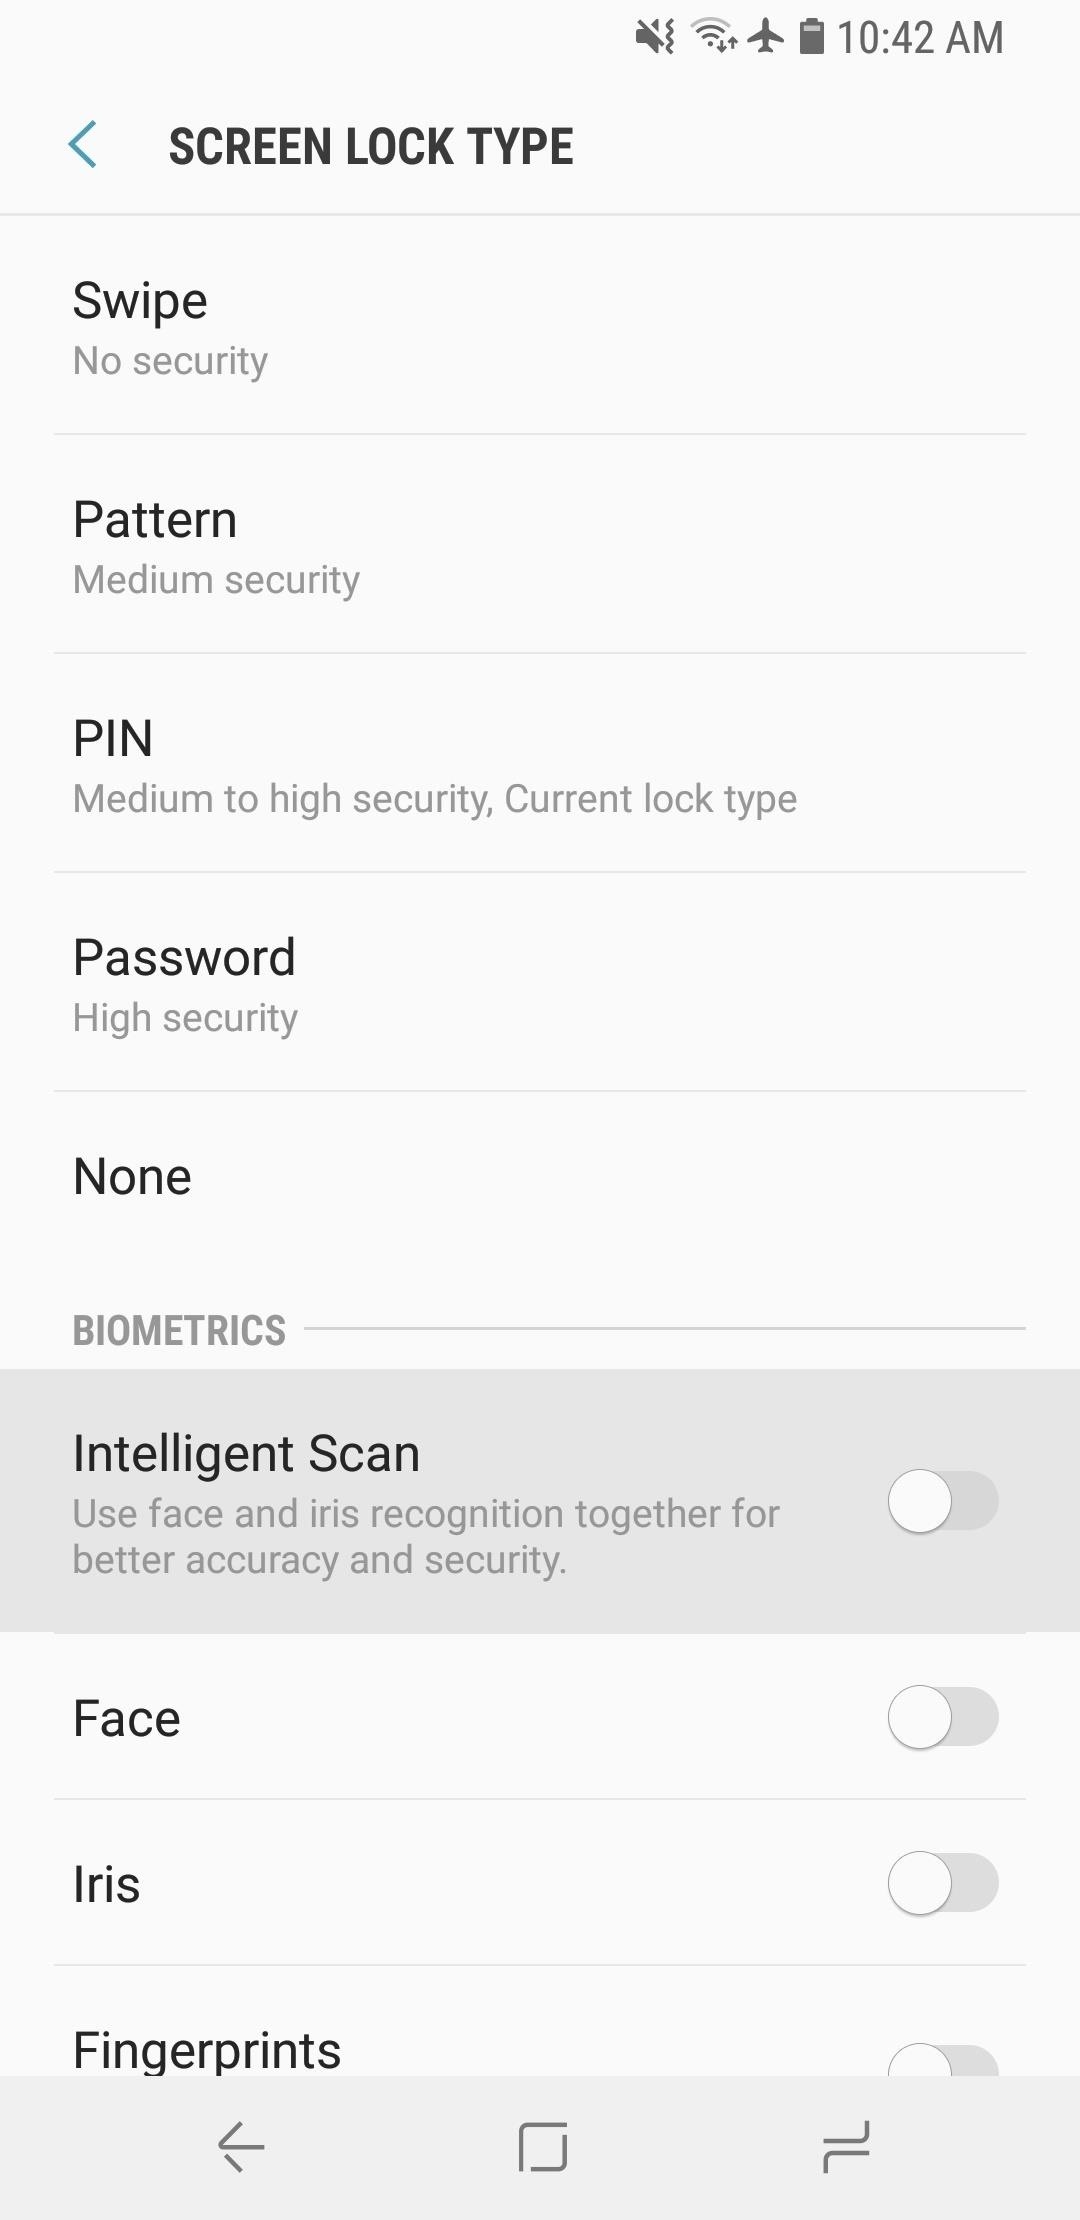 How to Use Intelligent Scan to Unlock Your Galaxy S9 Faster